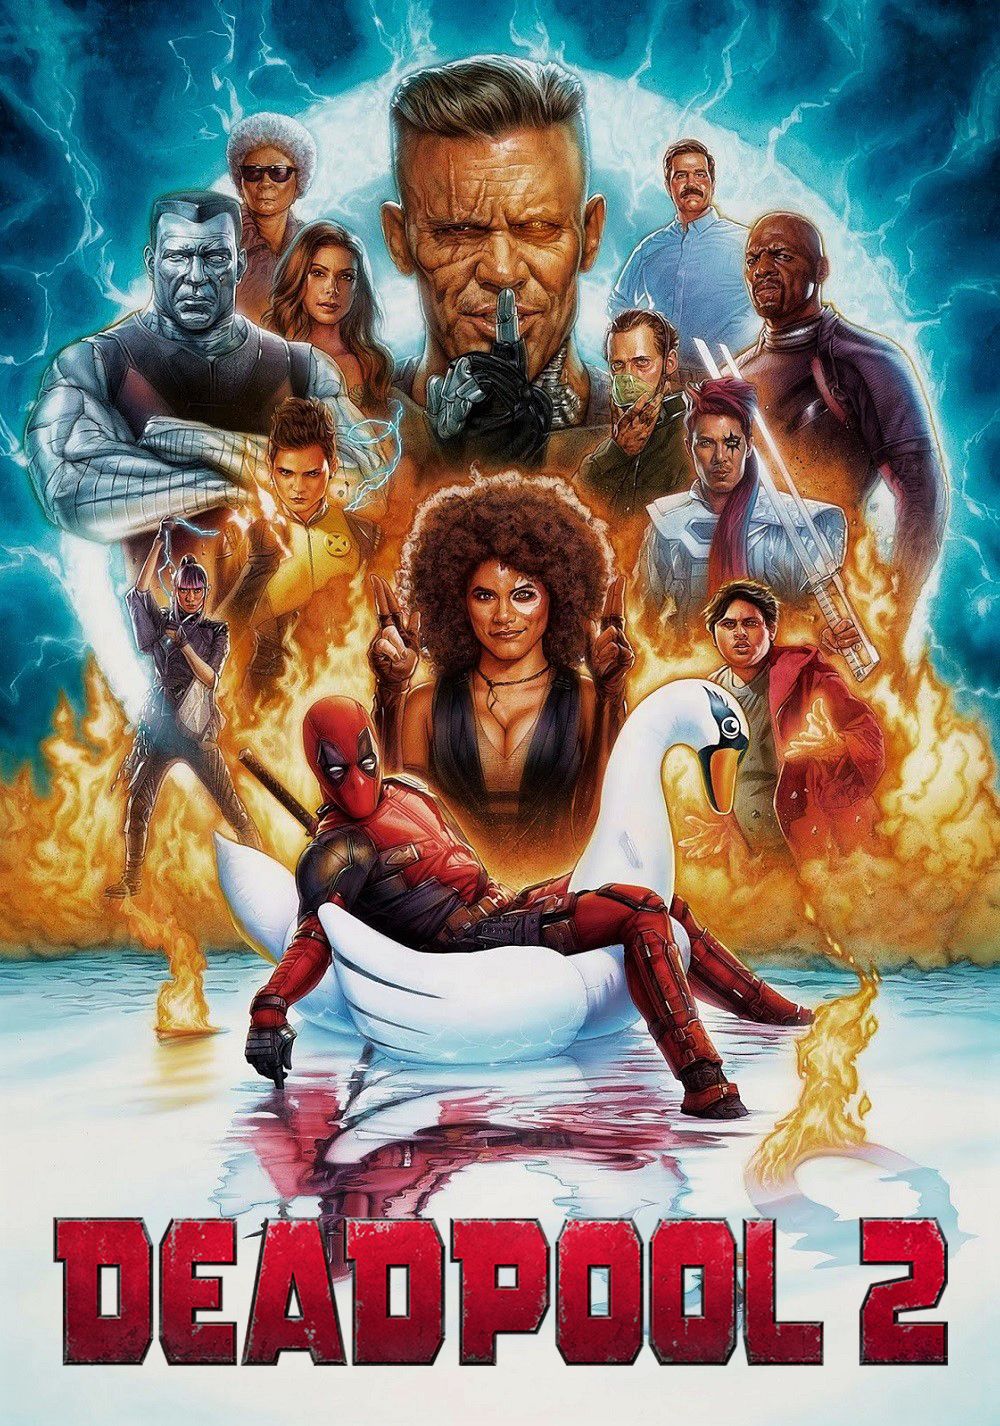 Deadpool poster from successful Lost Boys School of VFX alumni film credits for Visual Effects.